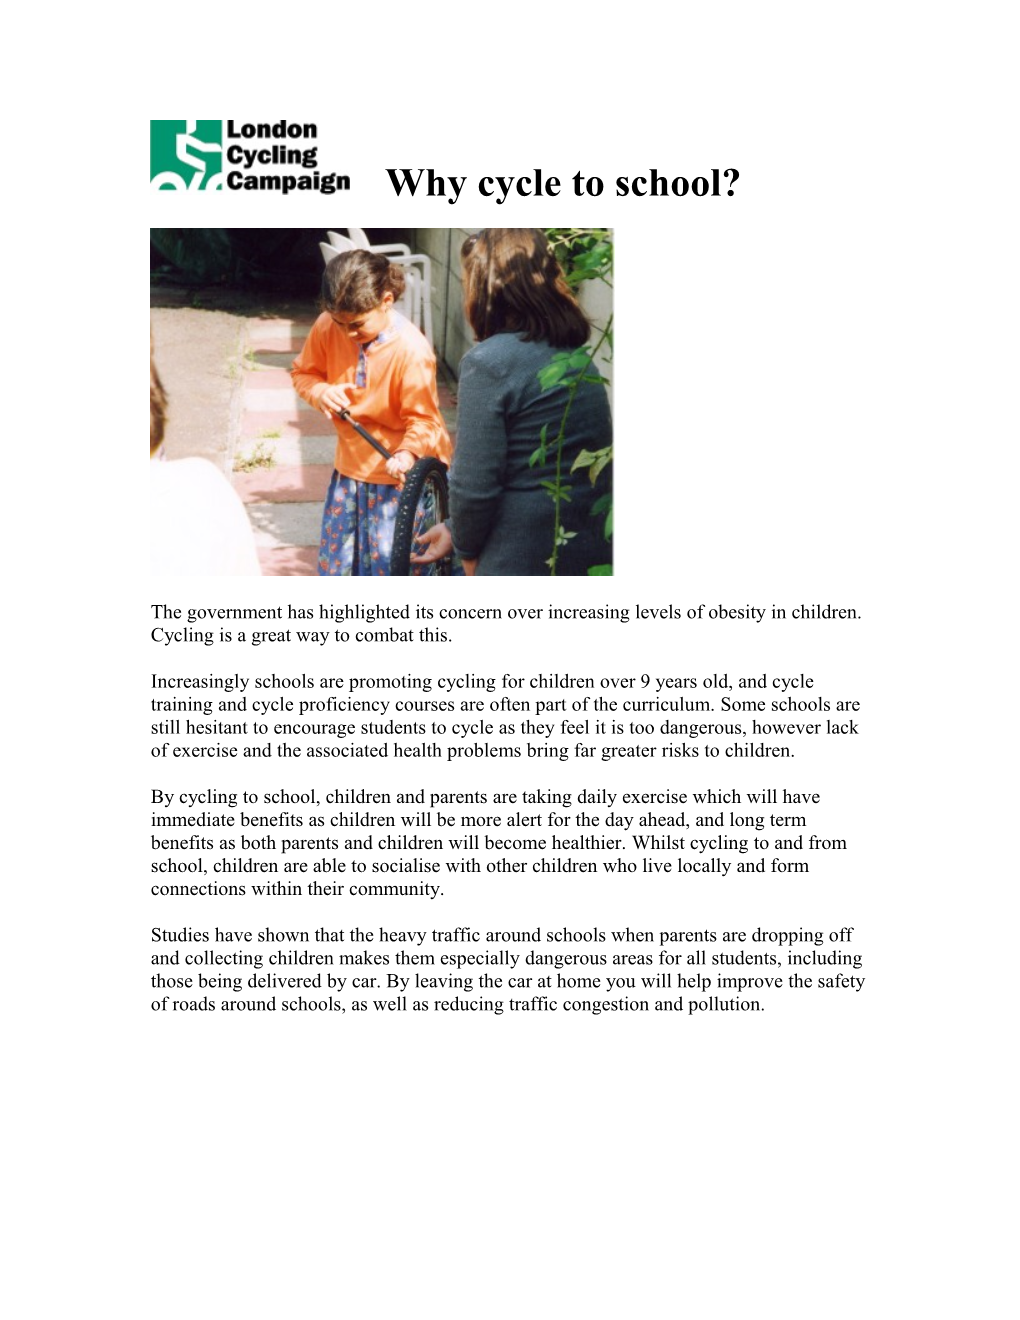 Why Cycle to School